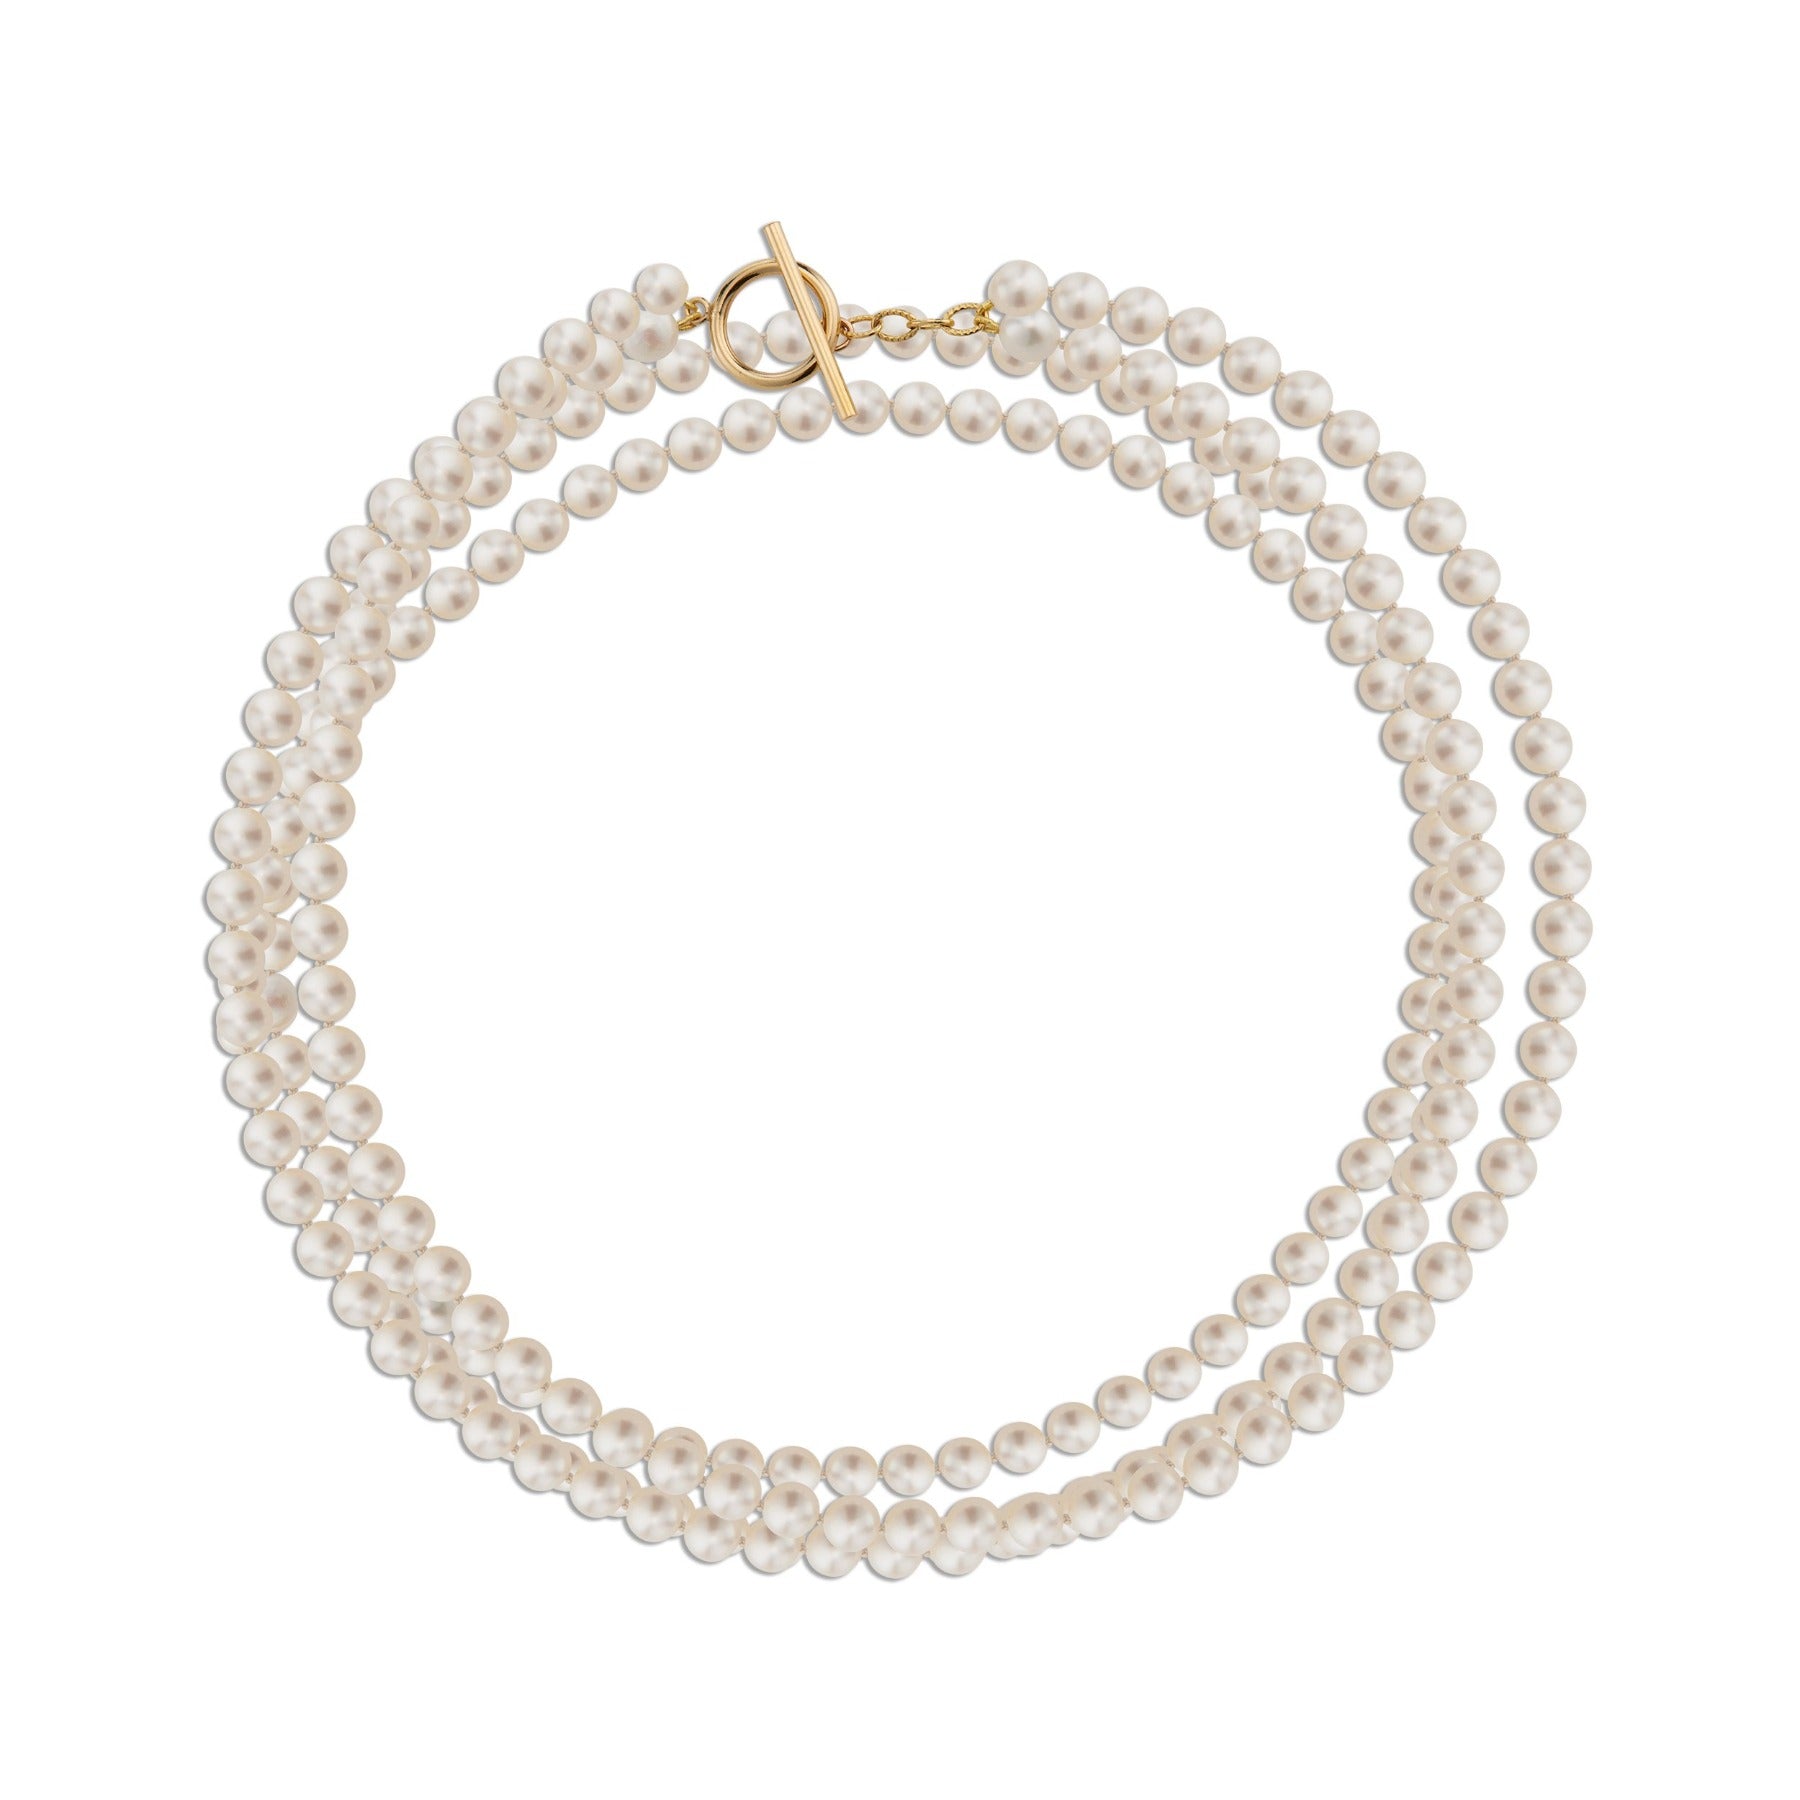 Long opera length button pearl necklace with 14k gold filled toggle clasp.